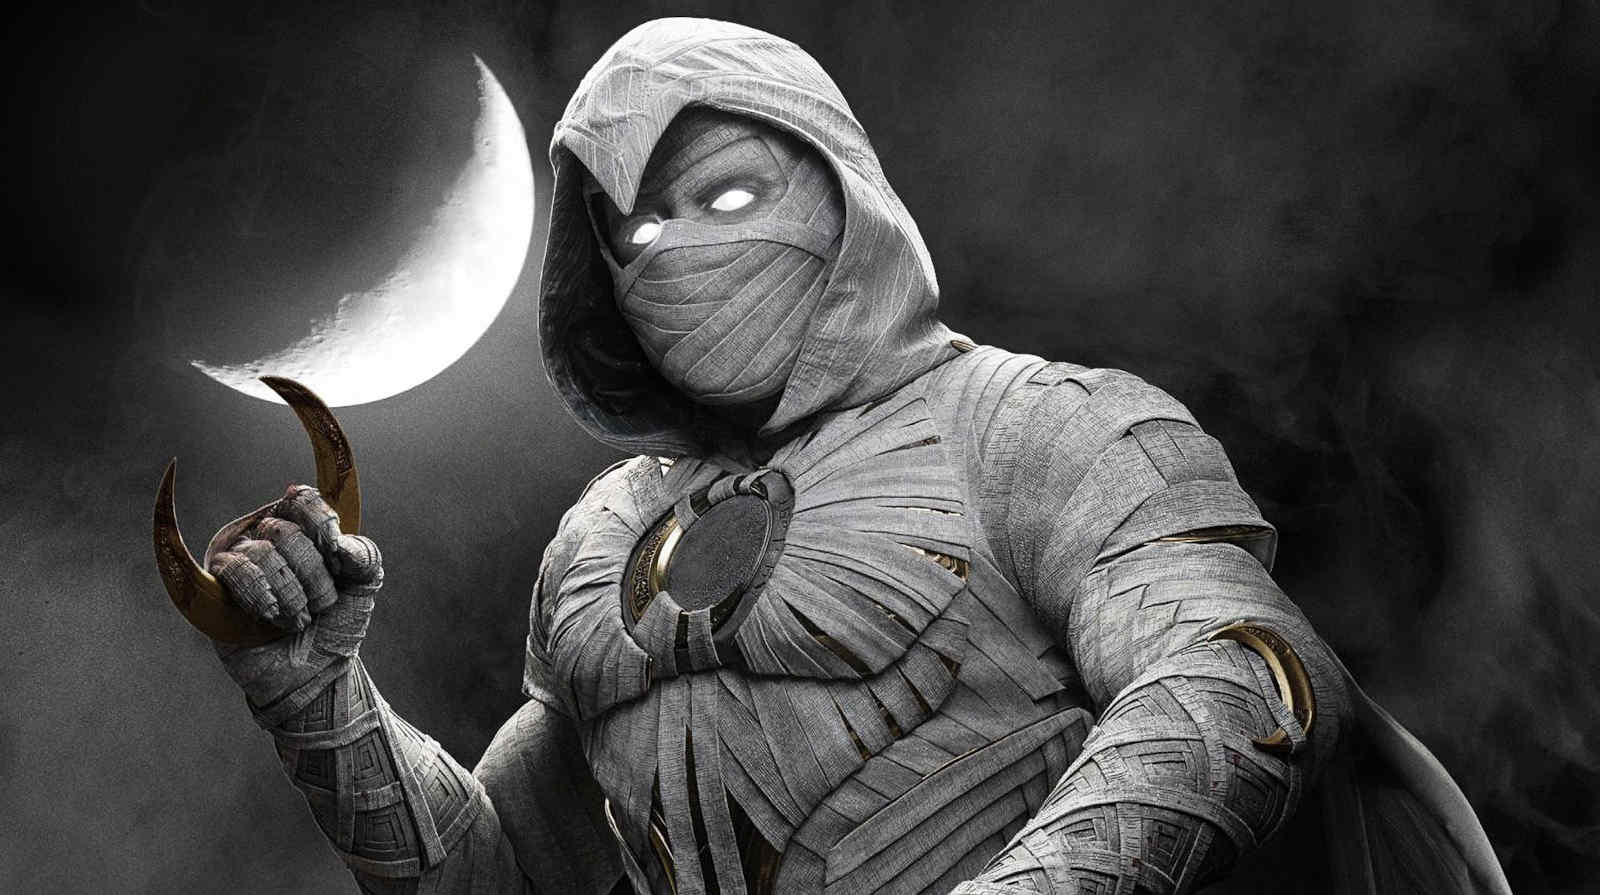 Watch ‘Moon Knight’ (2022) Free Online Streaming at Home